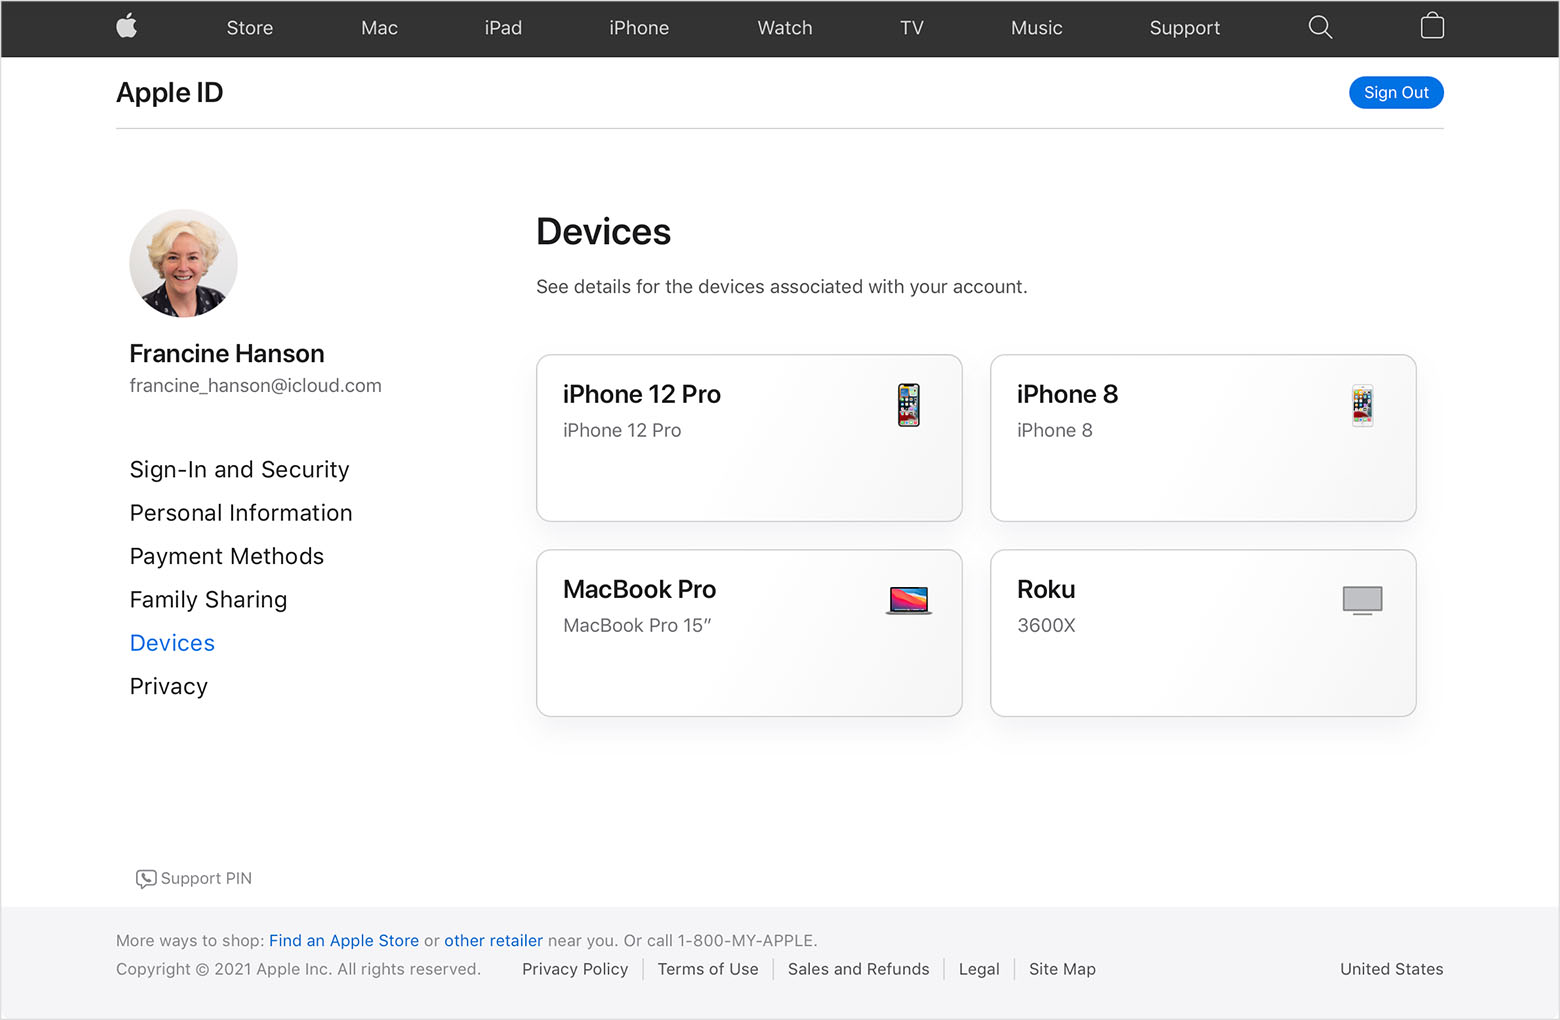 An image of appleid.apple.com showing three devices for Francine Hanson: an iPhone 12 Pro, a MacBook Pro, and a Roku.